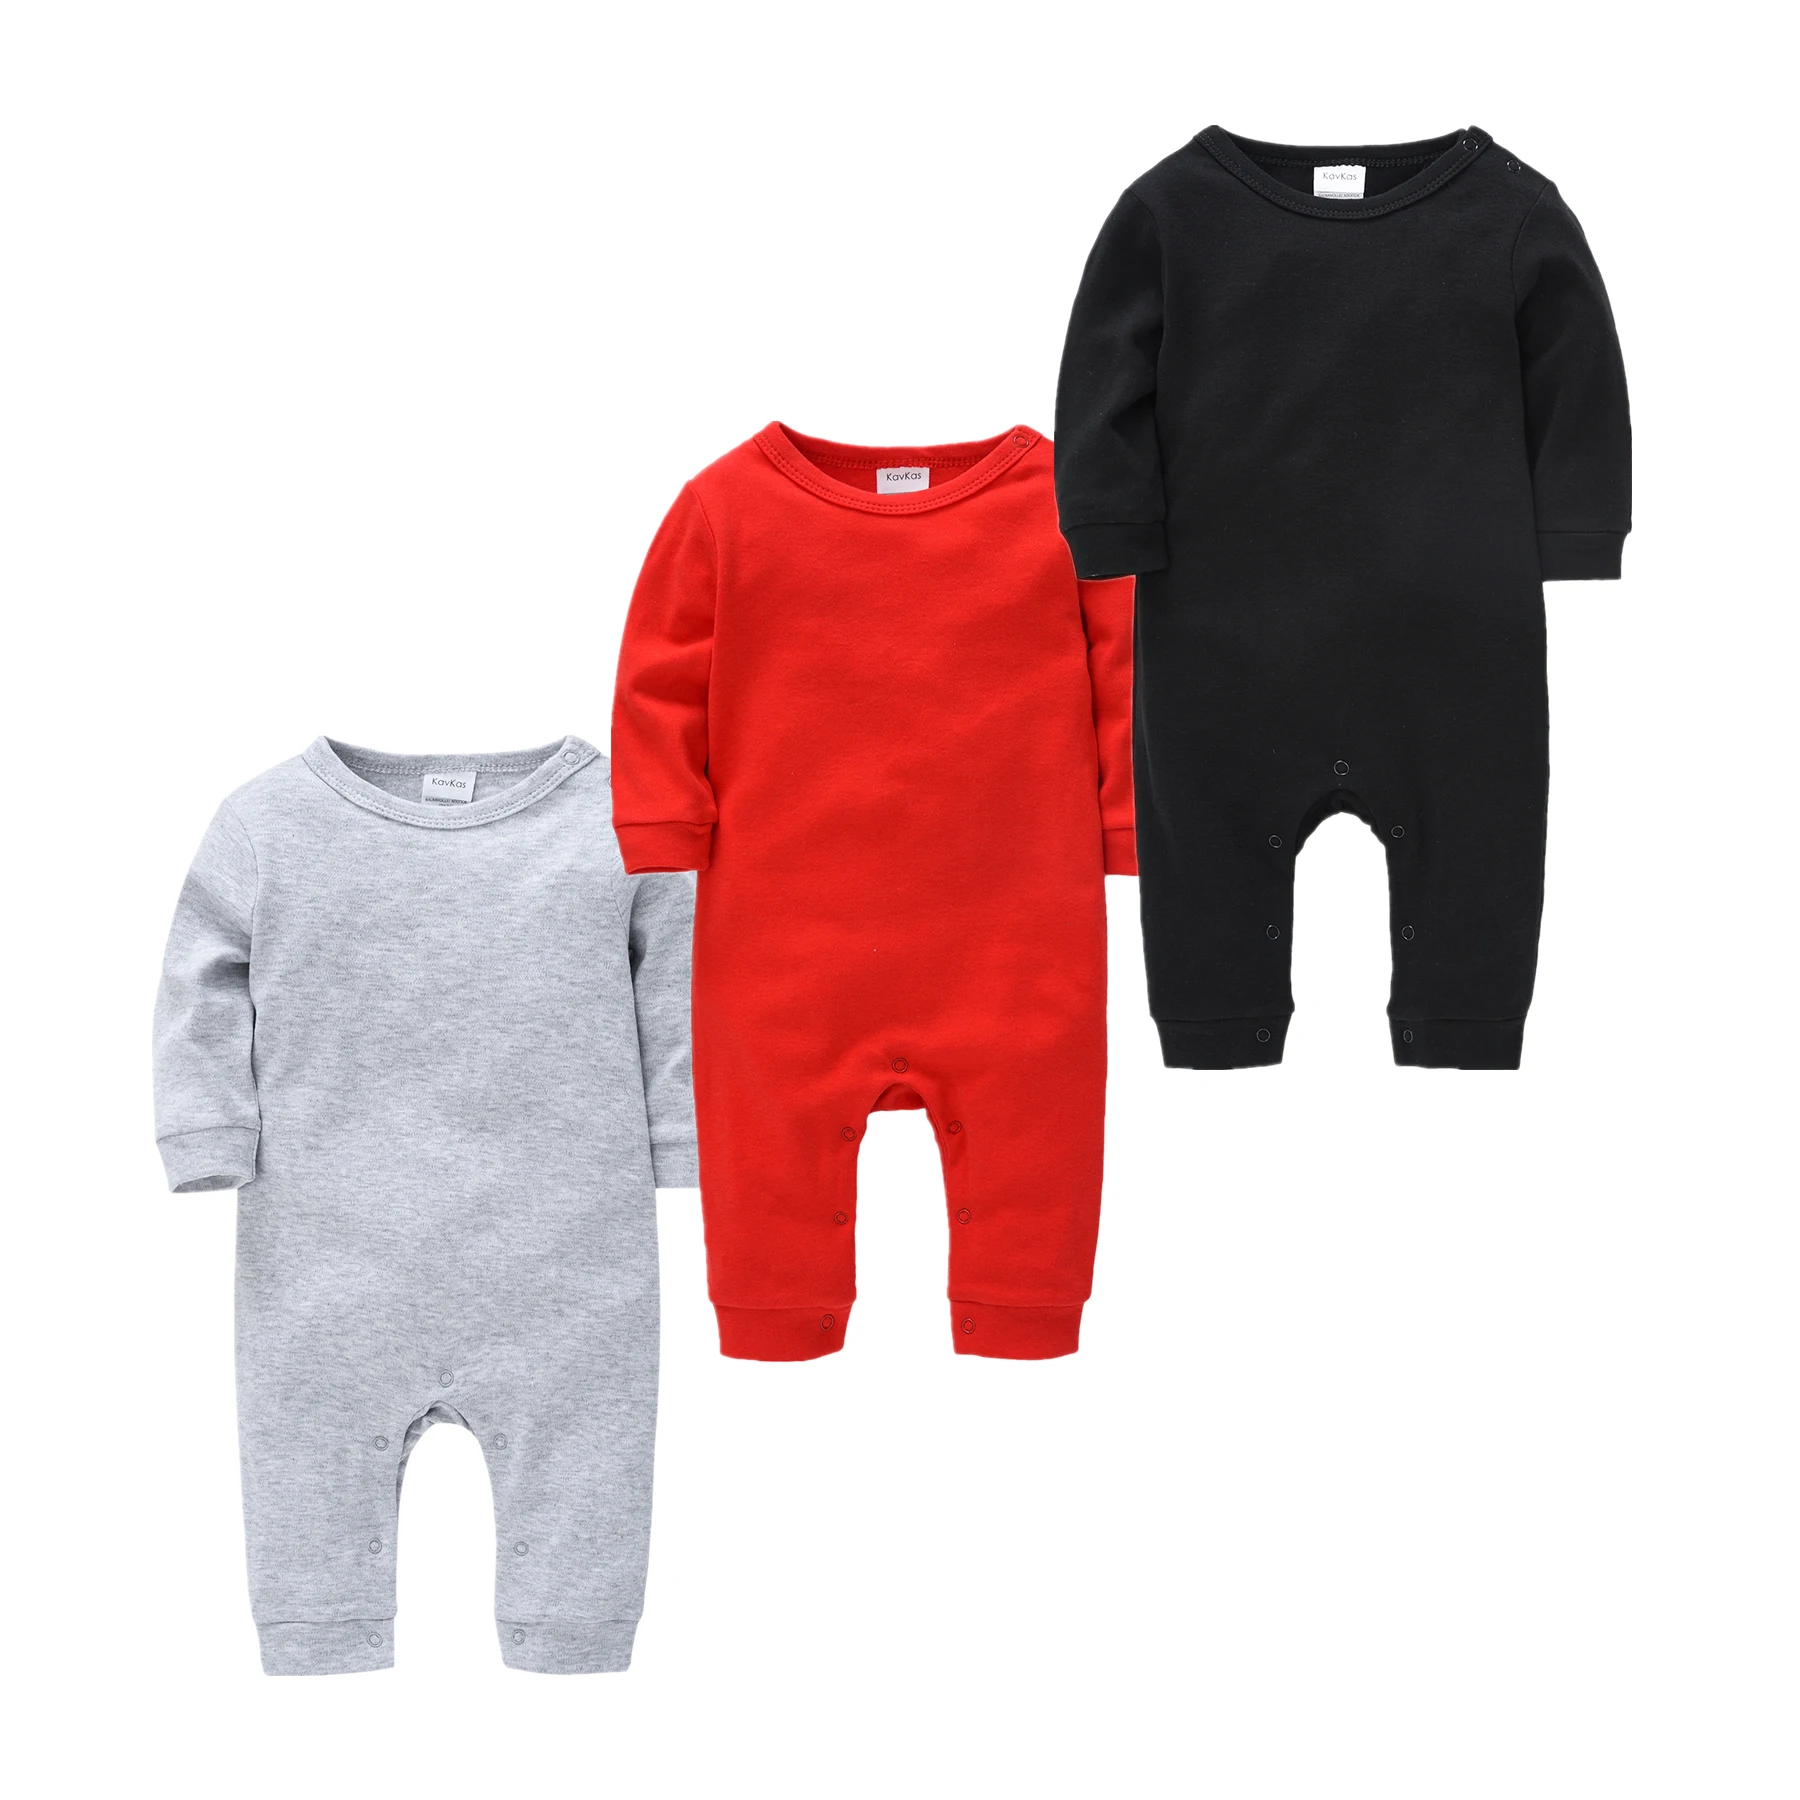 

Newborn Baby Boys Girl Rompers roupa de bebe Solid Infant Jumpsuit Long Sleeve Cotton Pajamas 0-12Month Overalls Baby Clothes